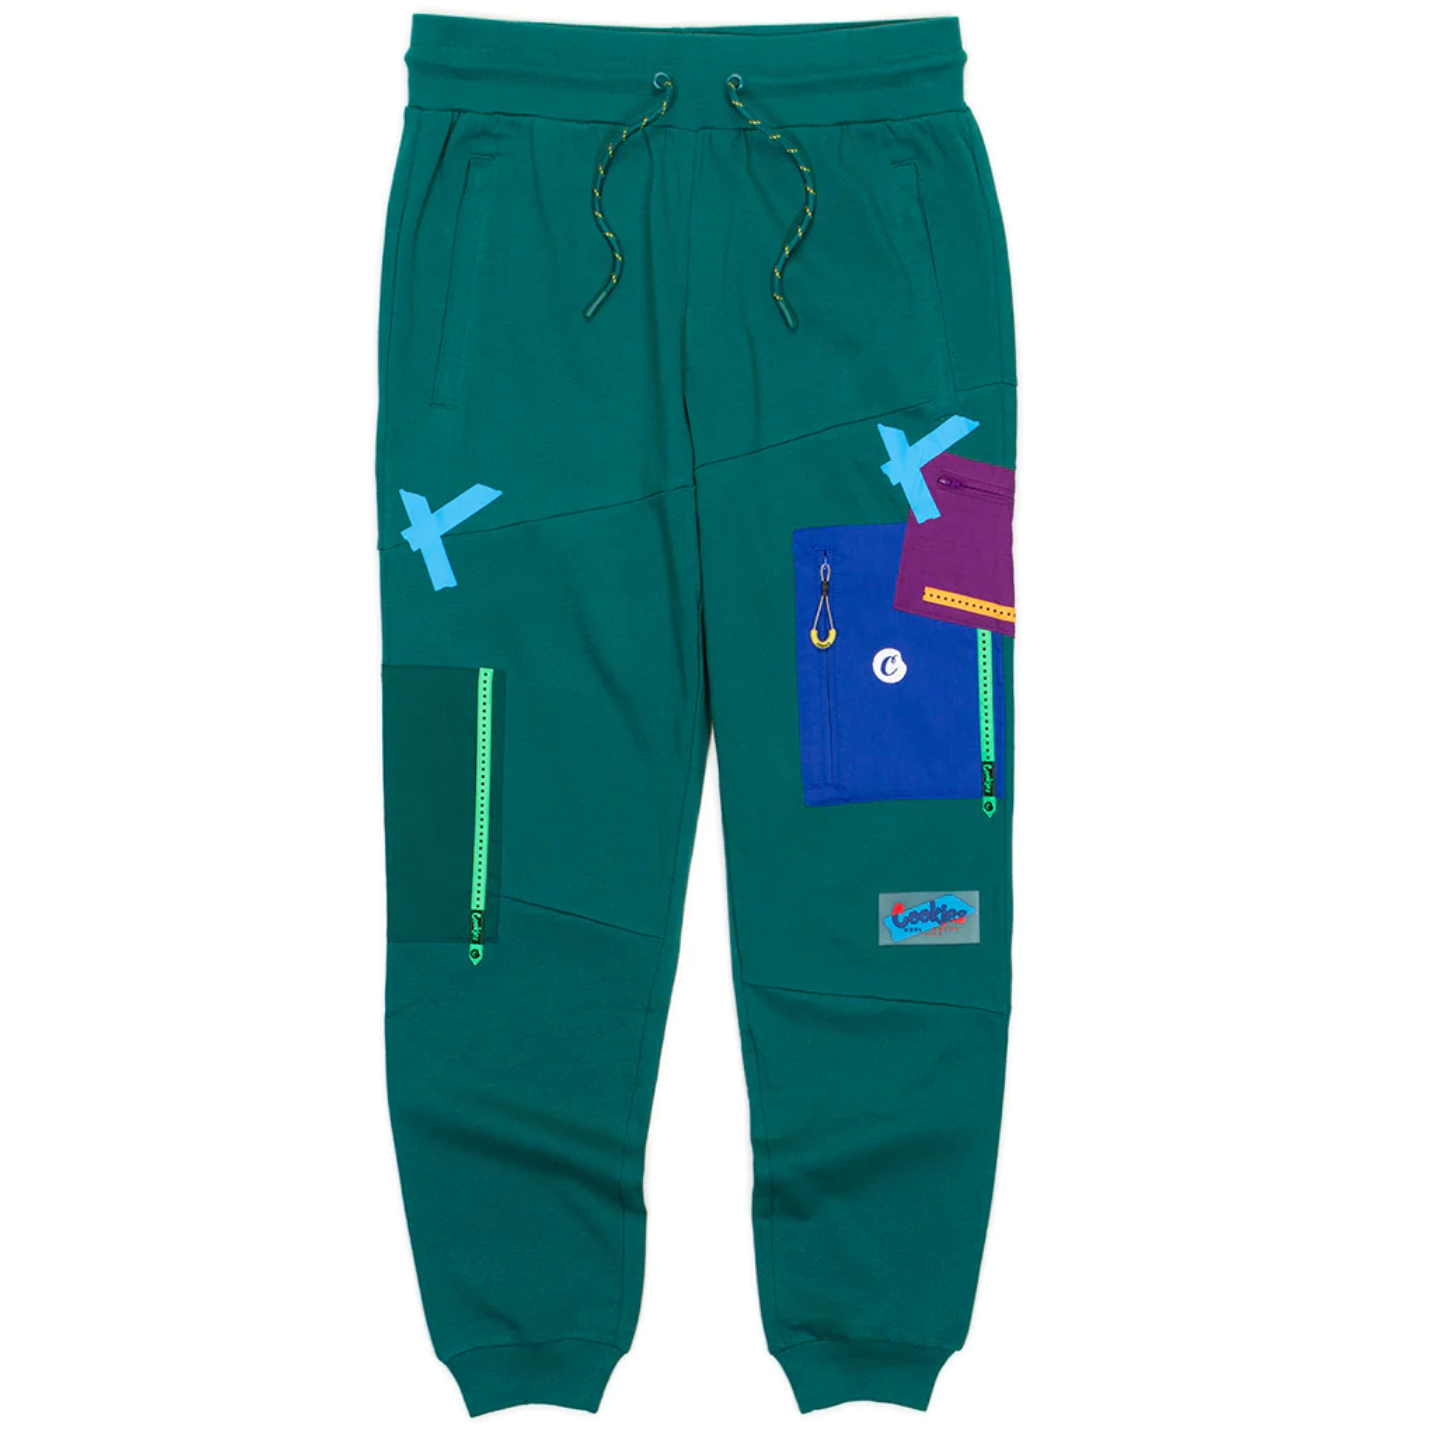 Cookies "All Conditions" - Sweatpants Green